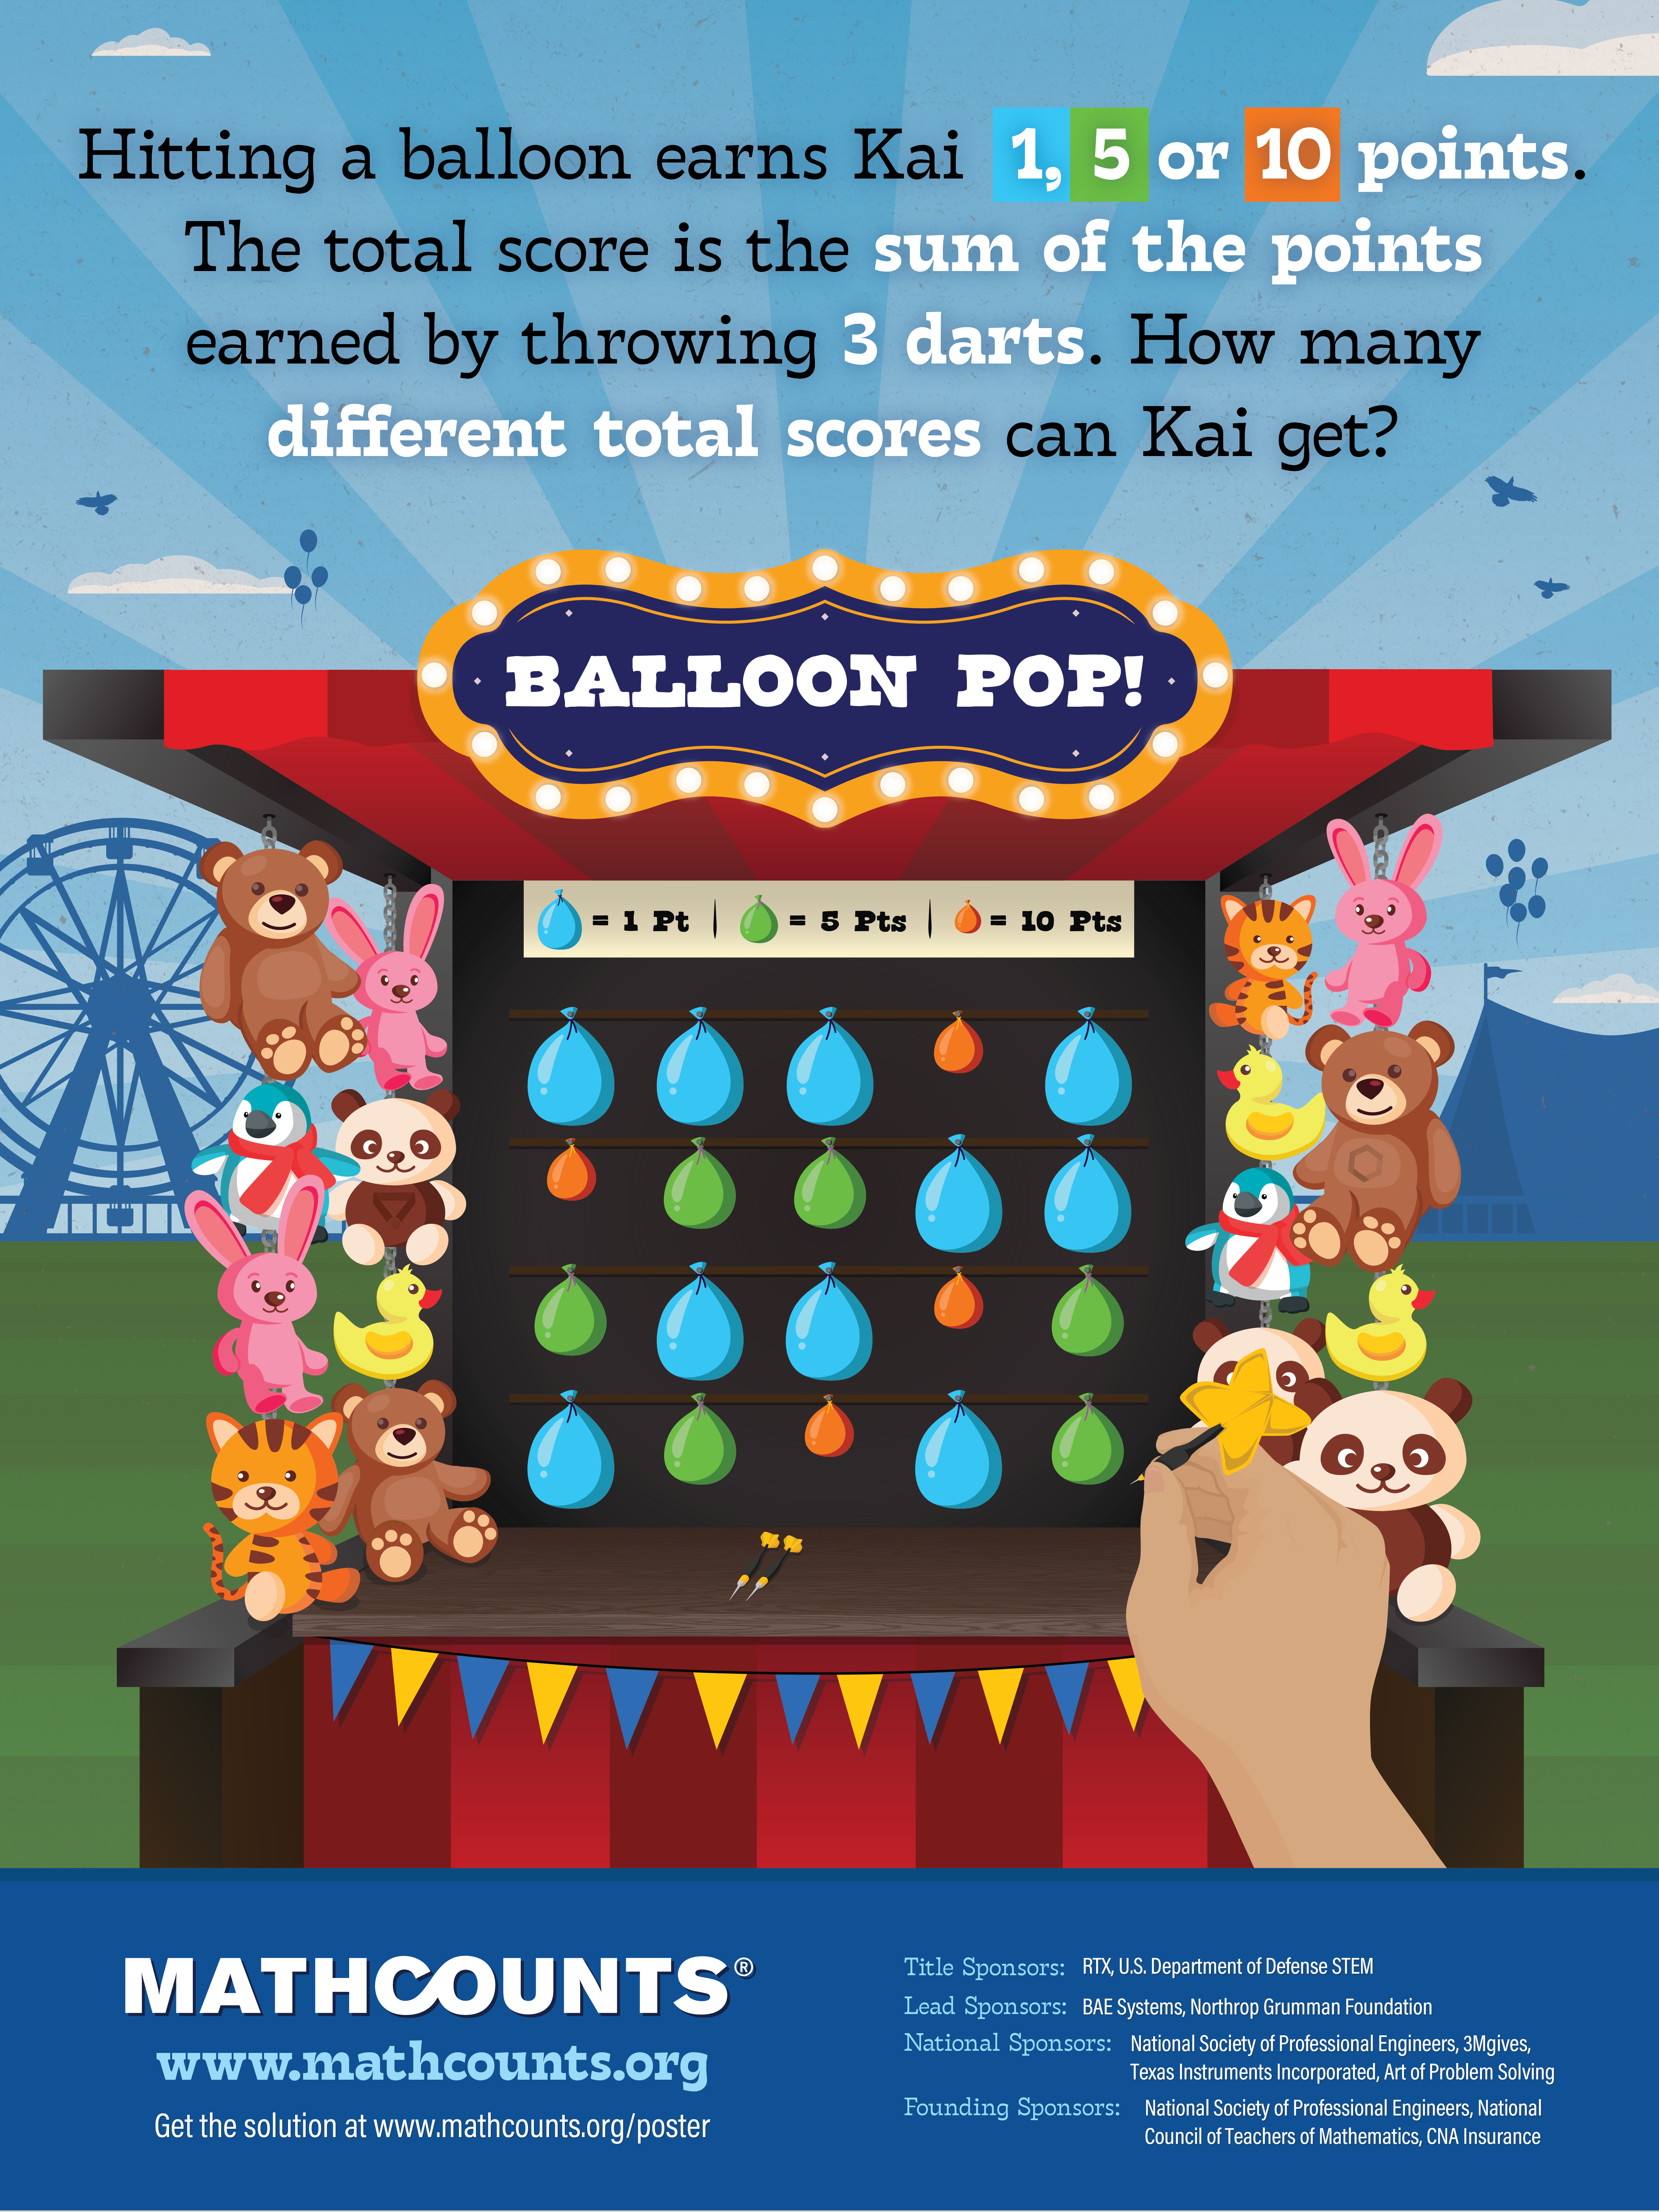 Balloop pop carnival game and a problem: Hitting a balloon earns Kai 1, 5 or 10 points. The total score is the sum of the points earned by throwing 3 darts. How many different total scores can Kai get?